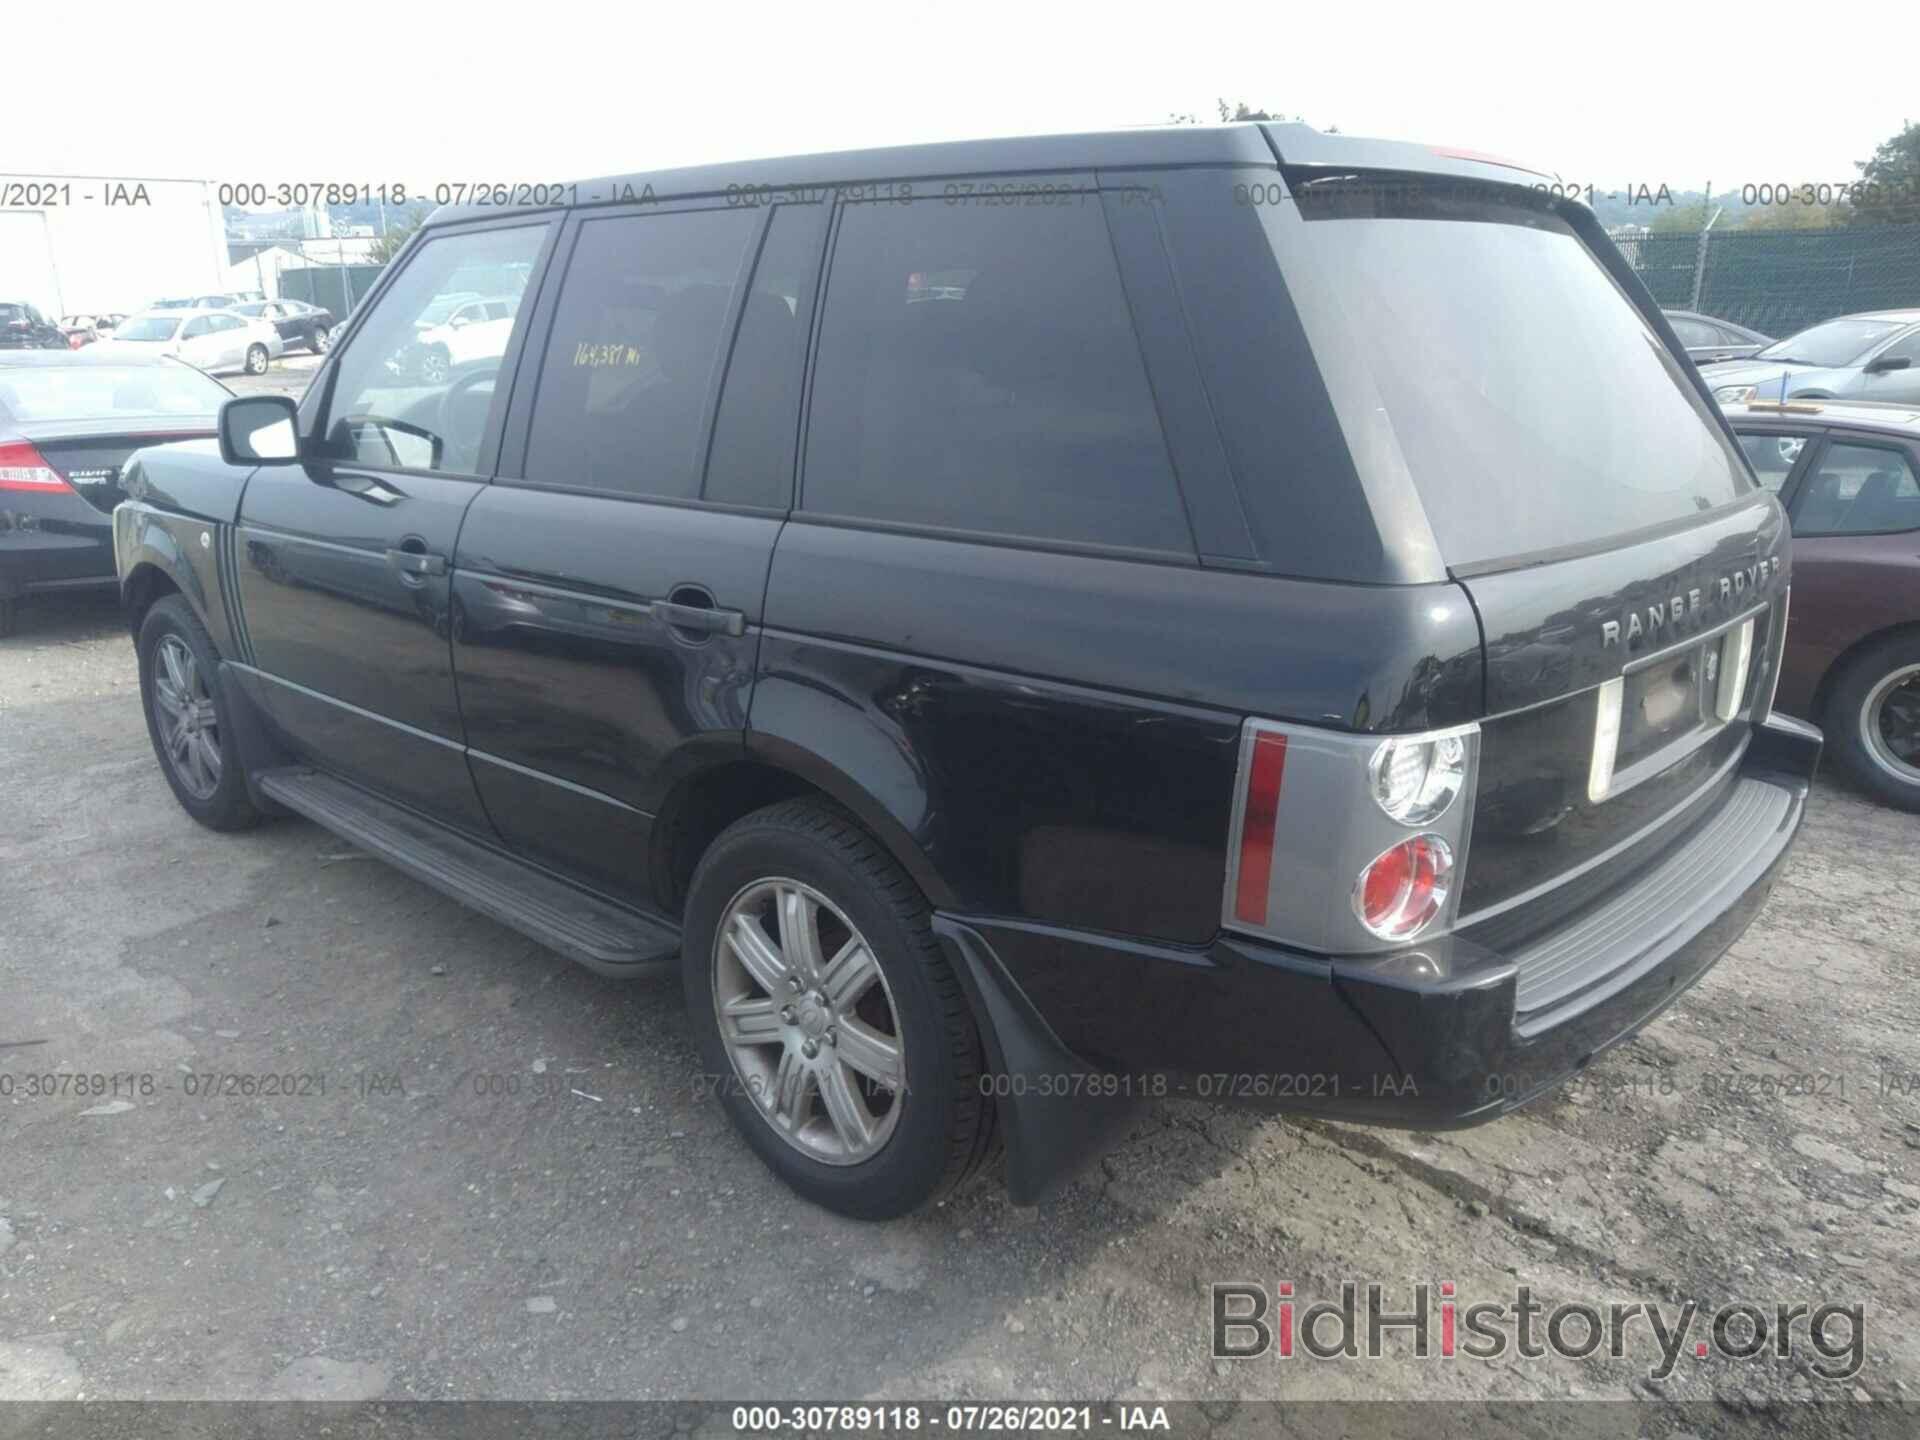 Report SALMF15456A219016 LAND ROVER RANGE ROVER 2006 BLACK